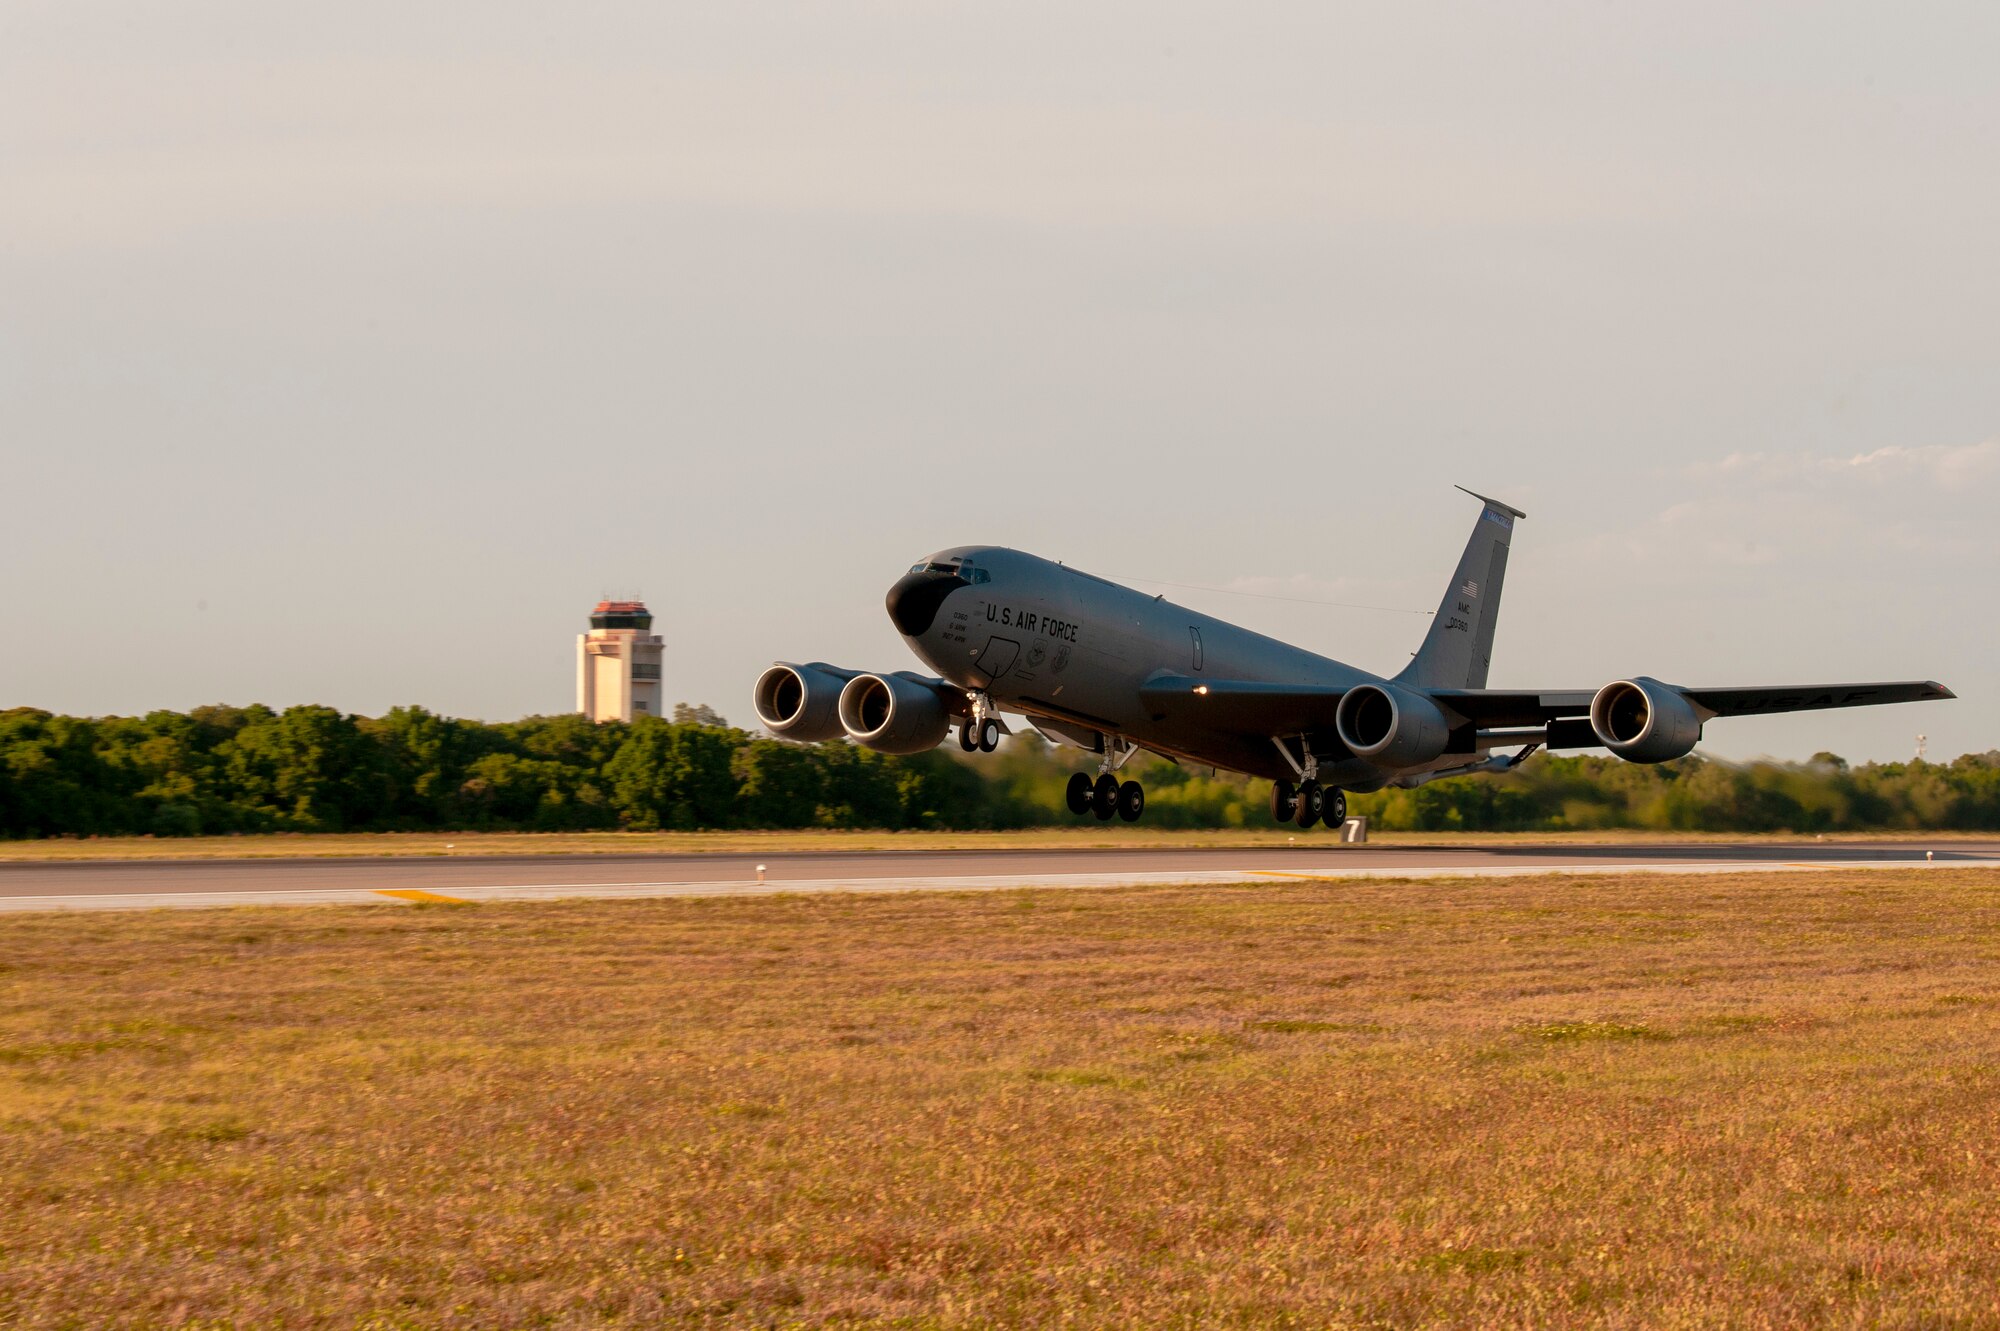 A KC-135 Stratotanker aircraft takes off from MacDill Air Force Base, Fla., April 9, 2021. The aircraft was carrying cargo and Airmen from MacDill AFB to their deployed location at Al Udeid Air Base, Qatar. (U.S. Air Force photo by Airman 1st Class David D. McLoney)